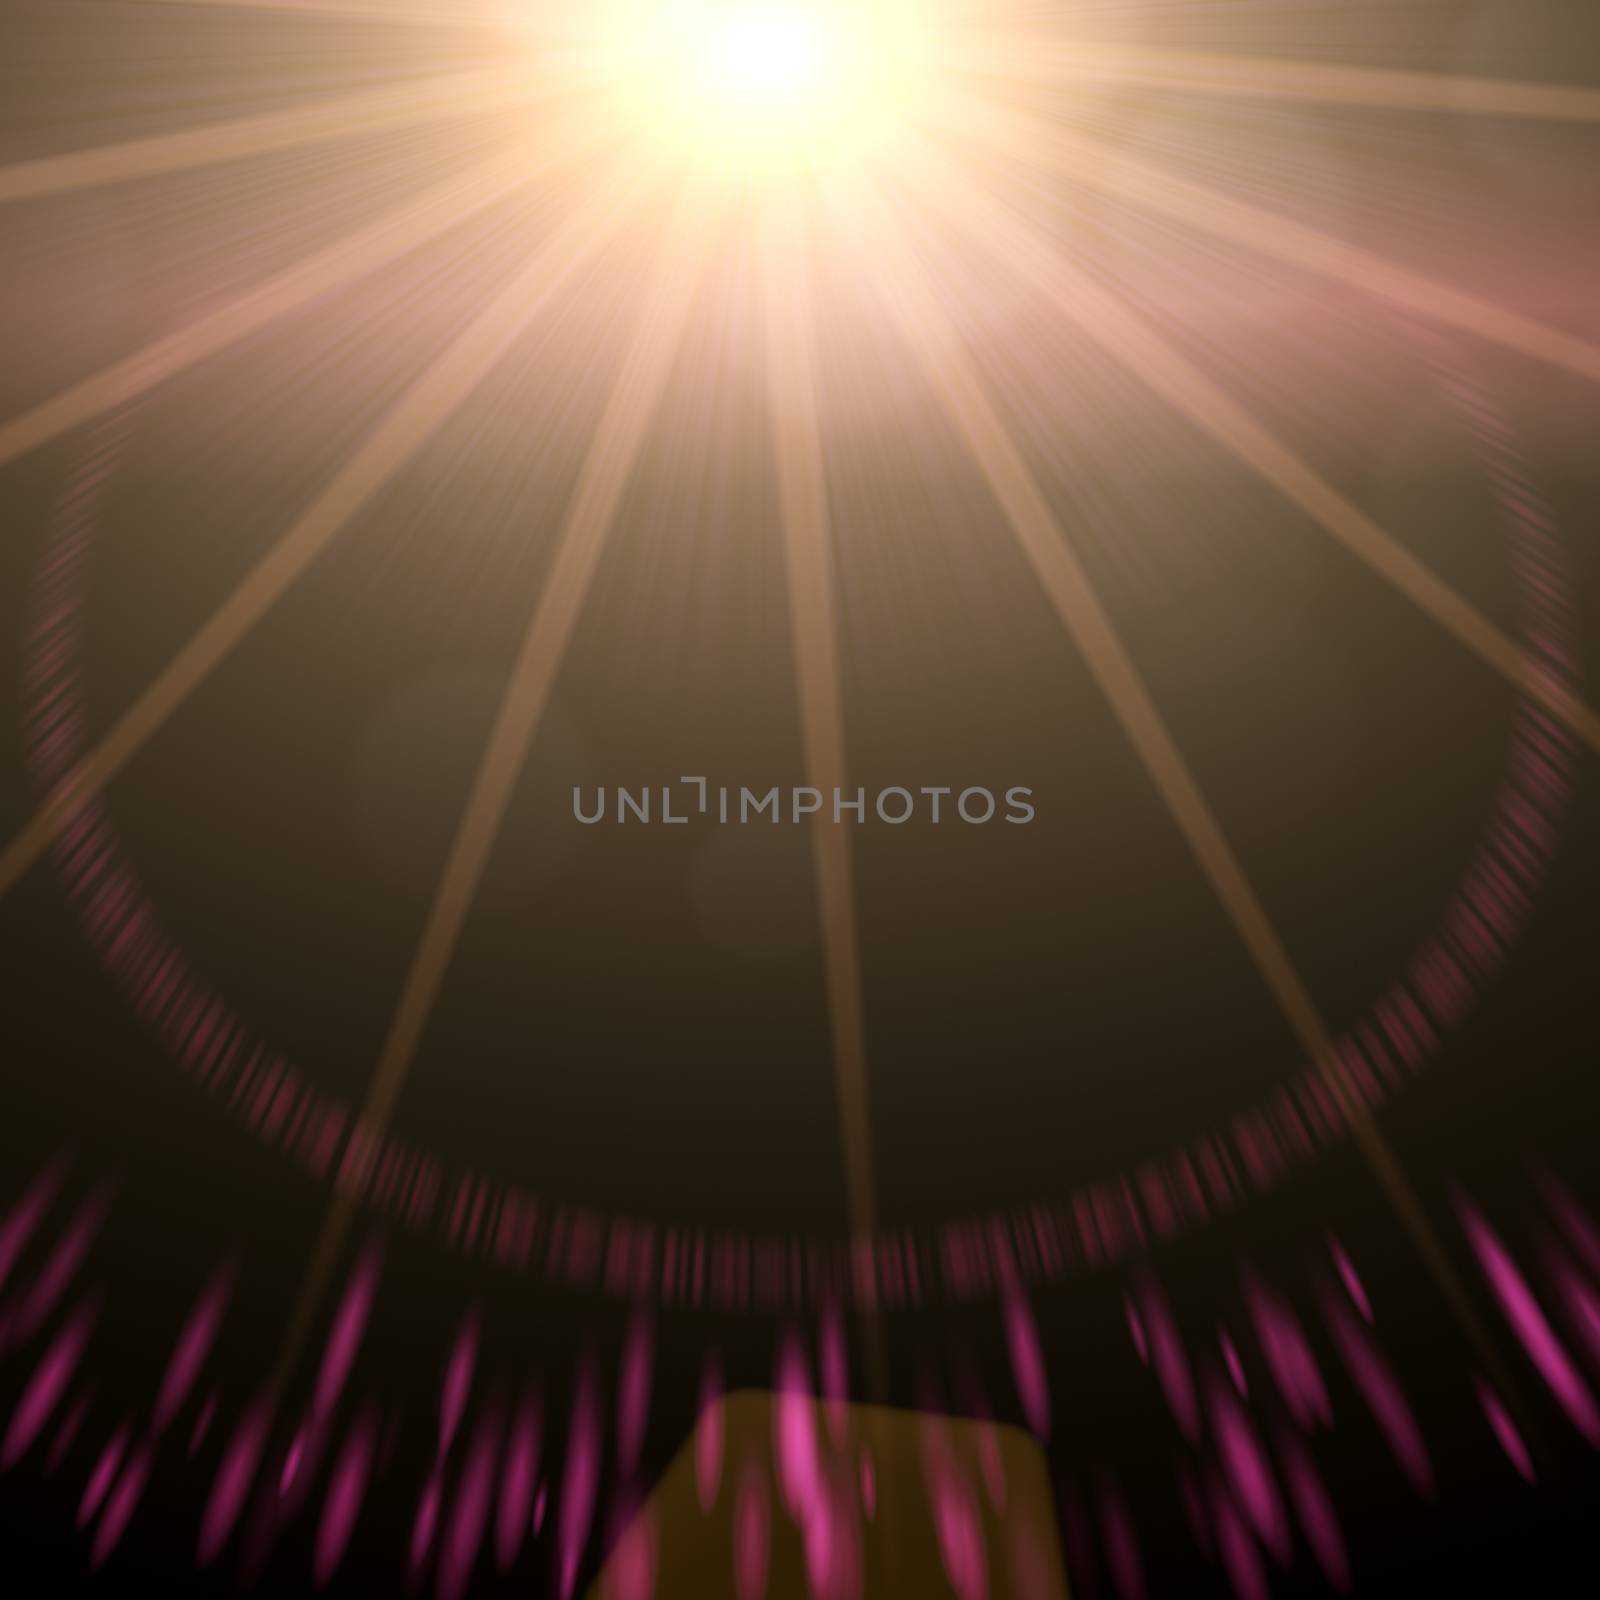 An image of a sun with rays ands sparkles background